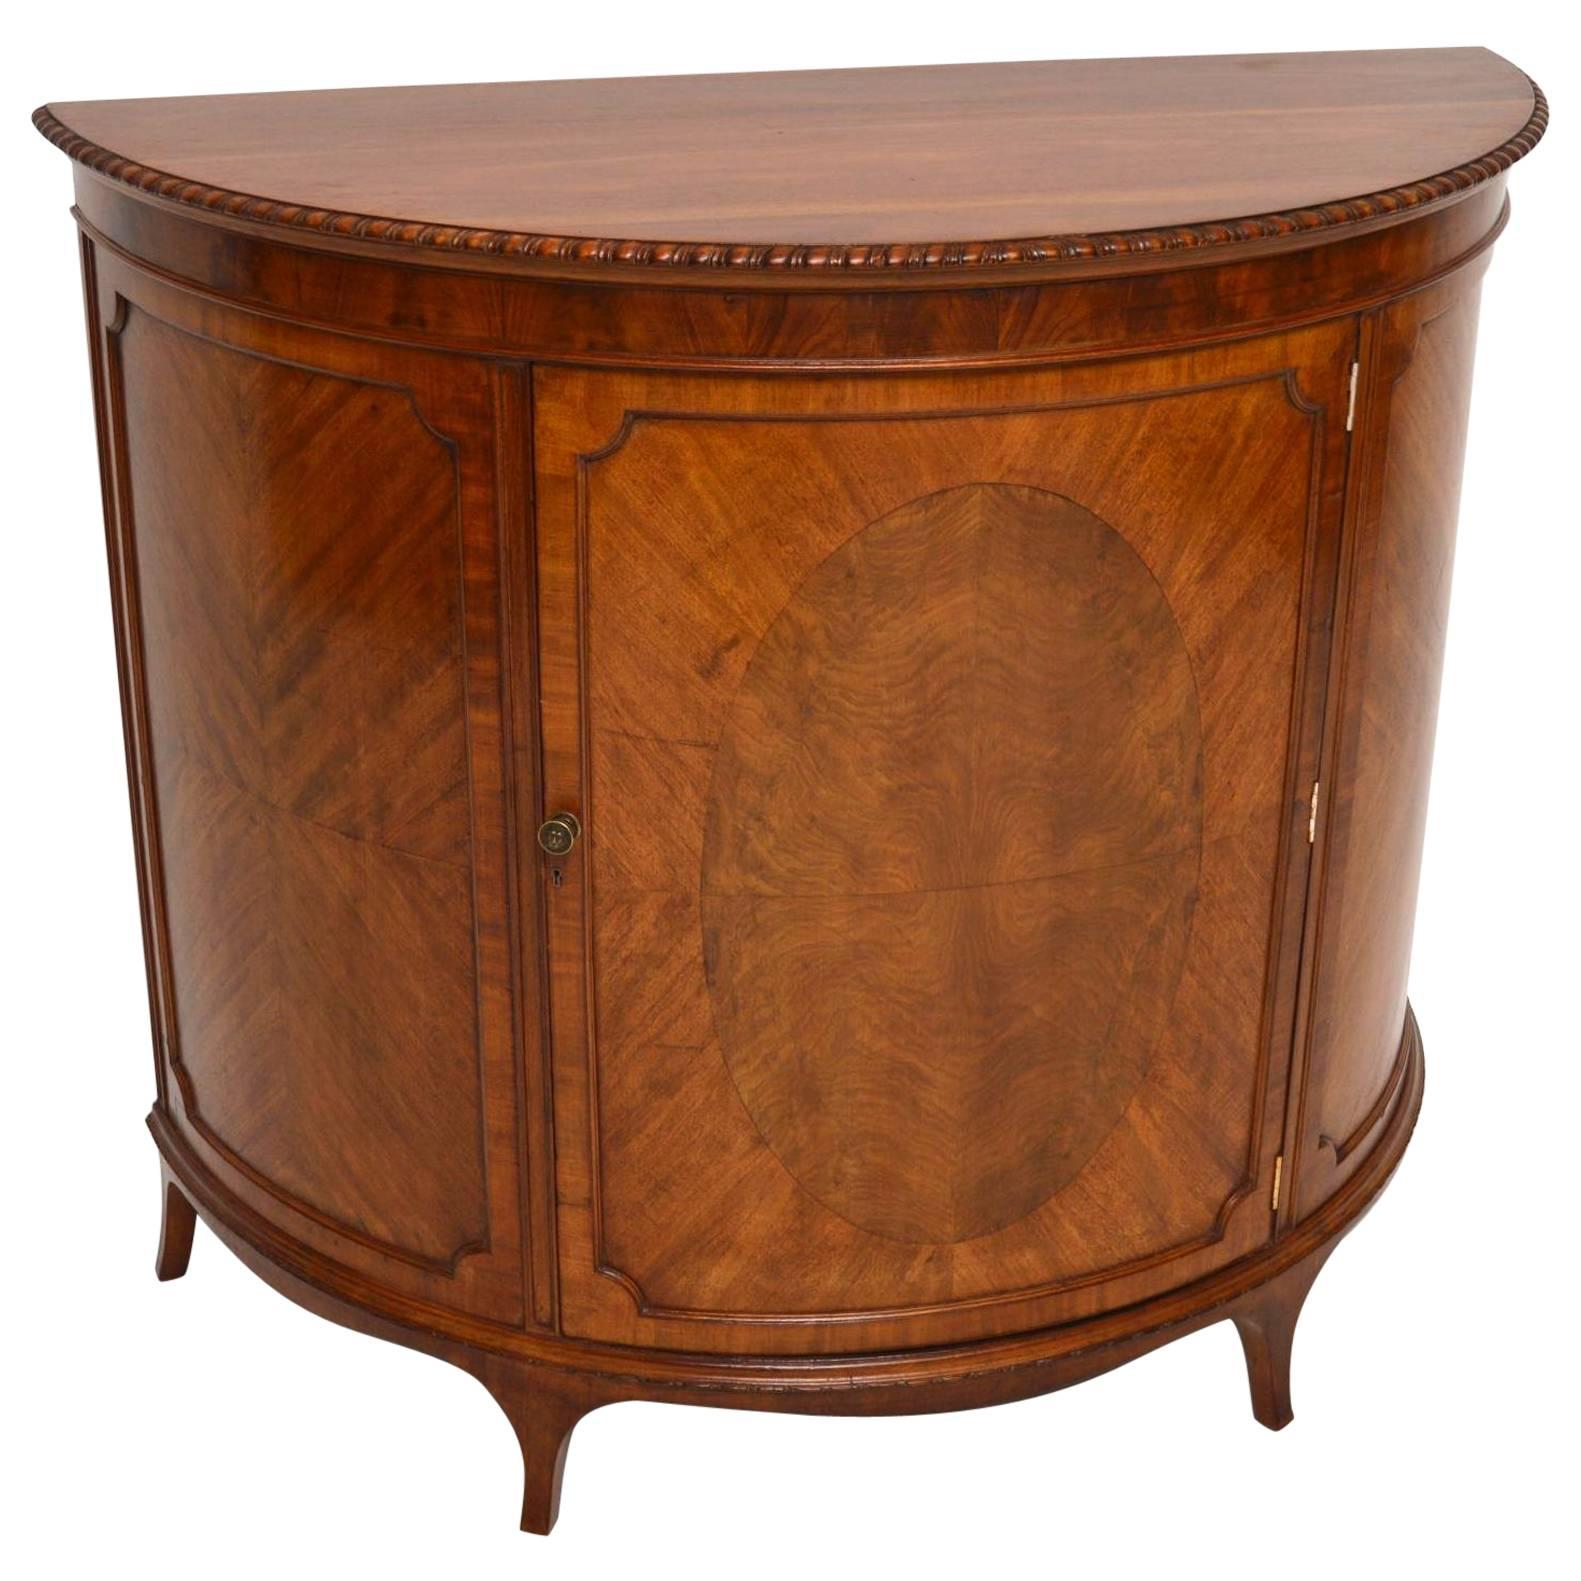 Antique Mahogany Curved Front Cabinet